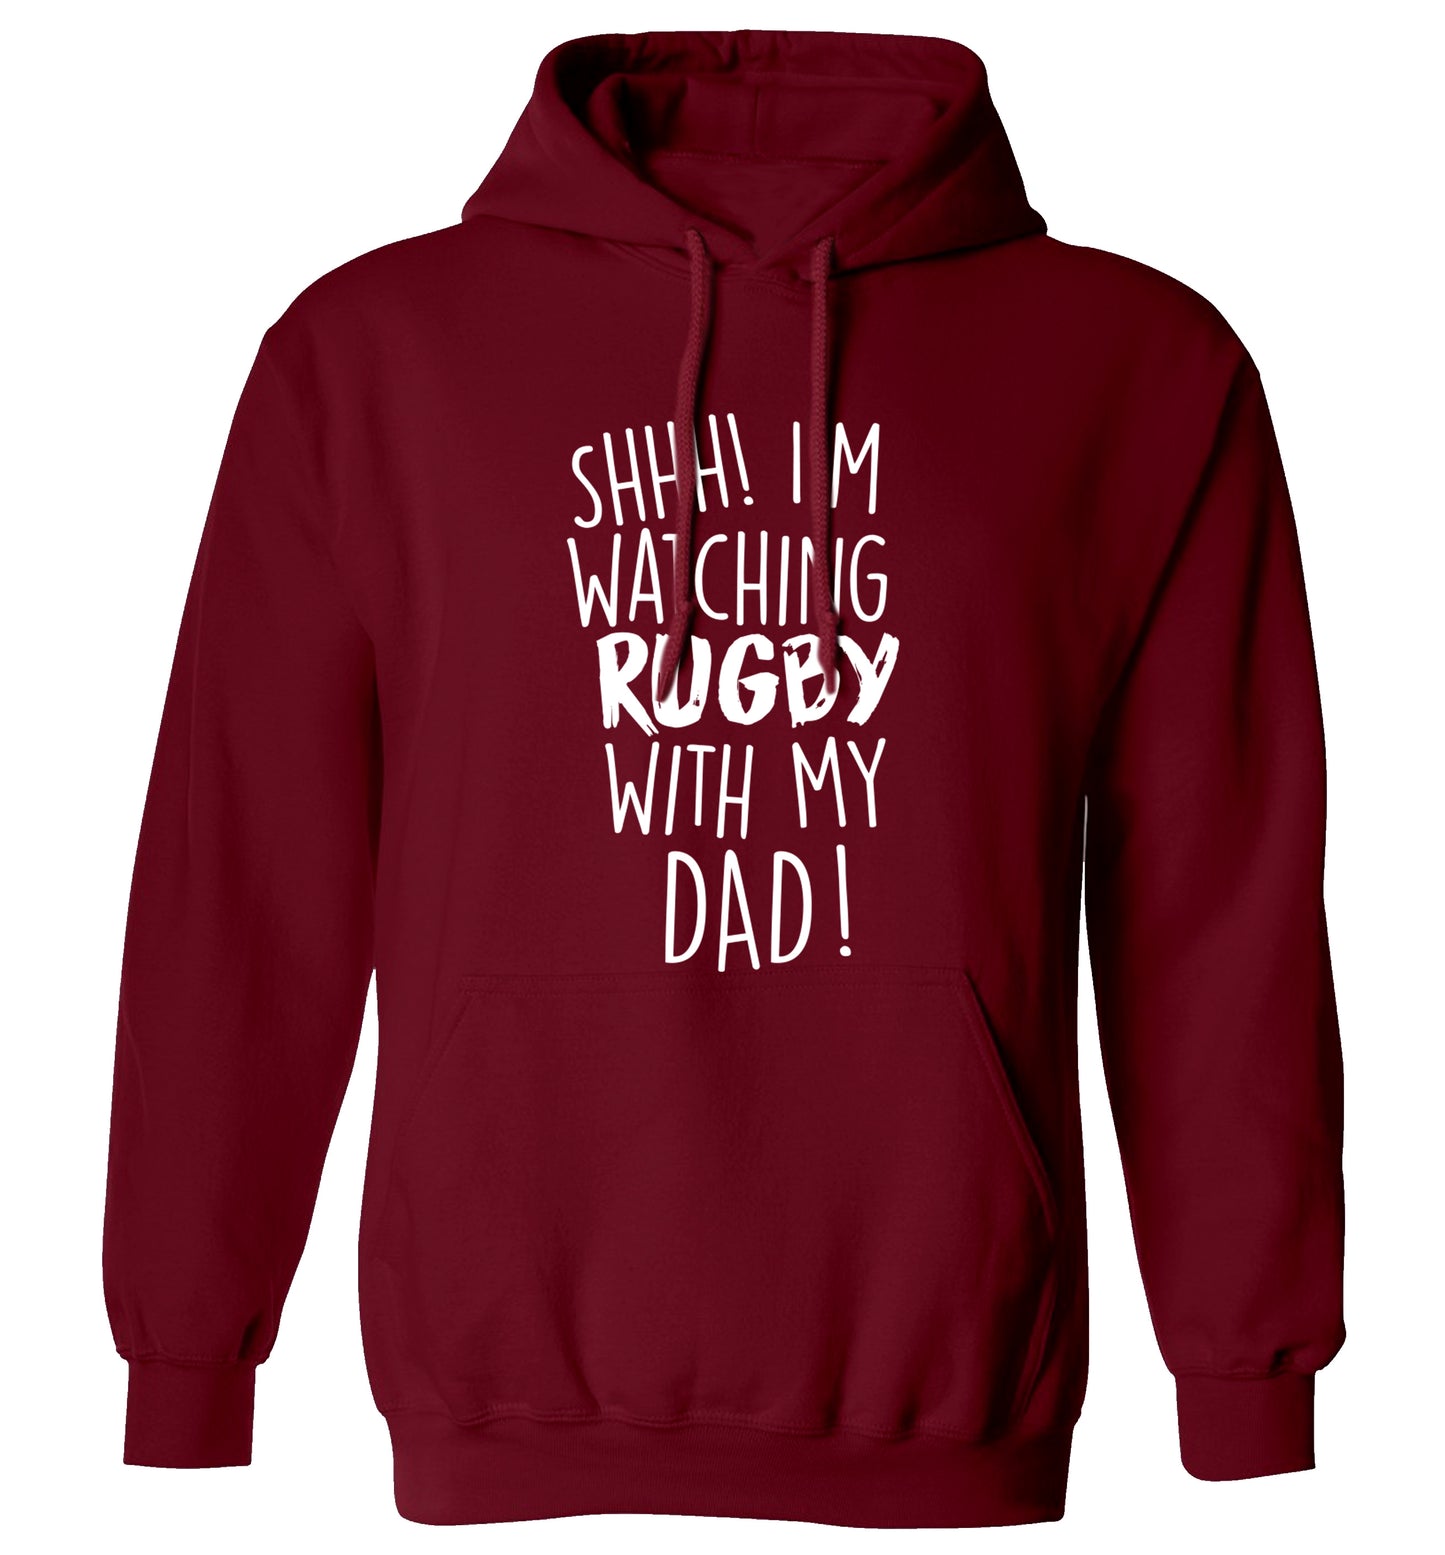 Shh... I'm watching rugby with my dad adults unisex maroon hoodie 2XL